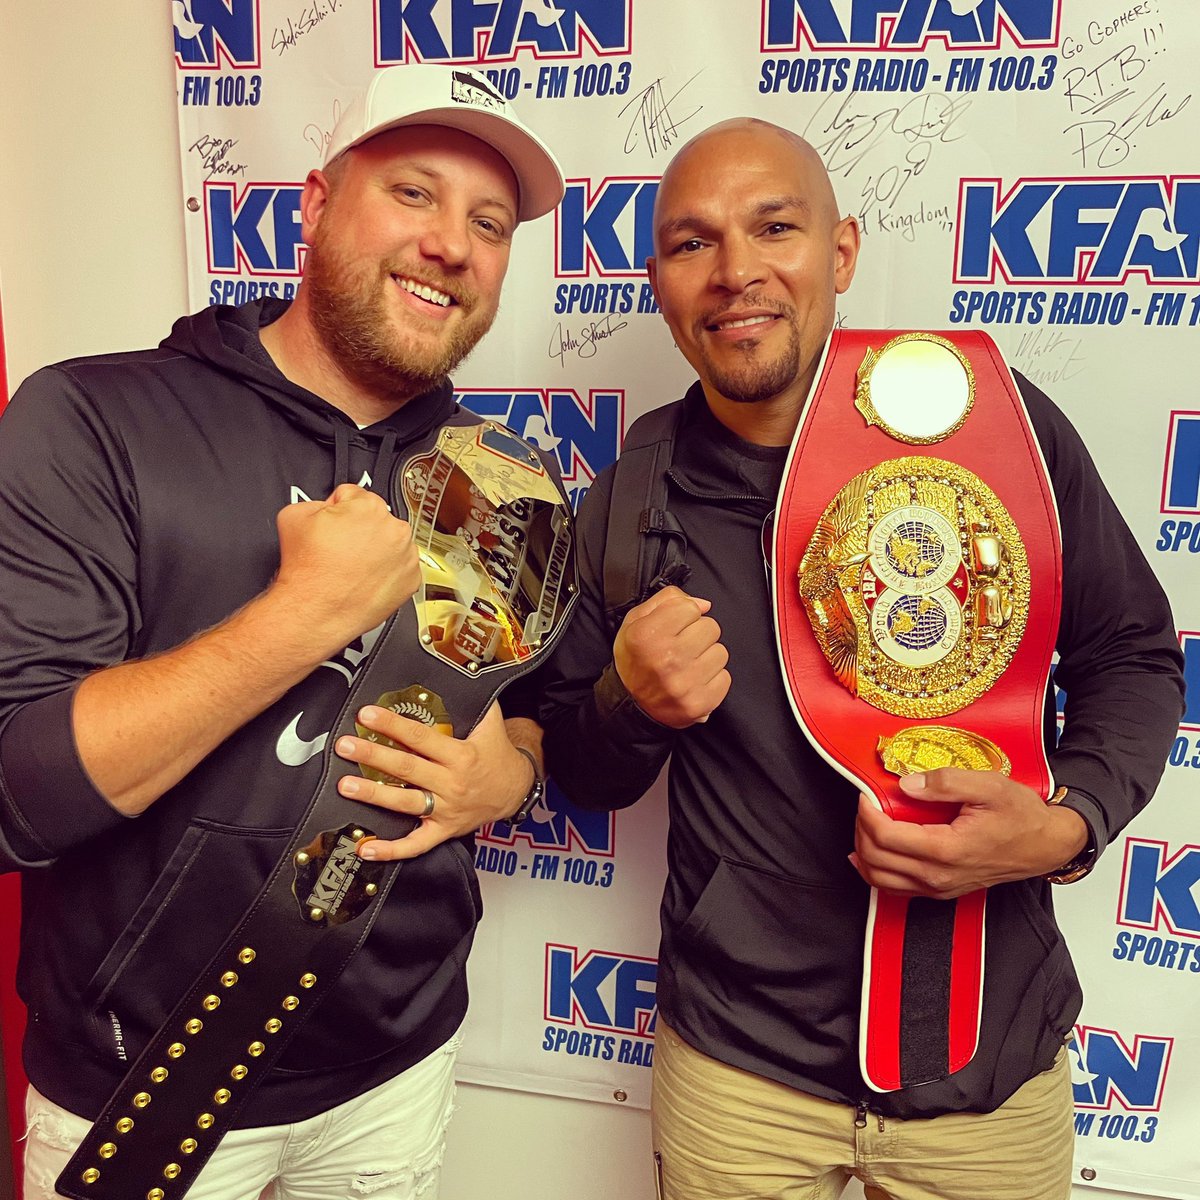 Shoutout to “The Champ” and congratulations on your retirement @GoldenCalebT! Heck of a ride my man! #TeamTruax #kfan #osseo